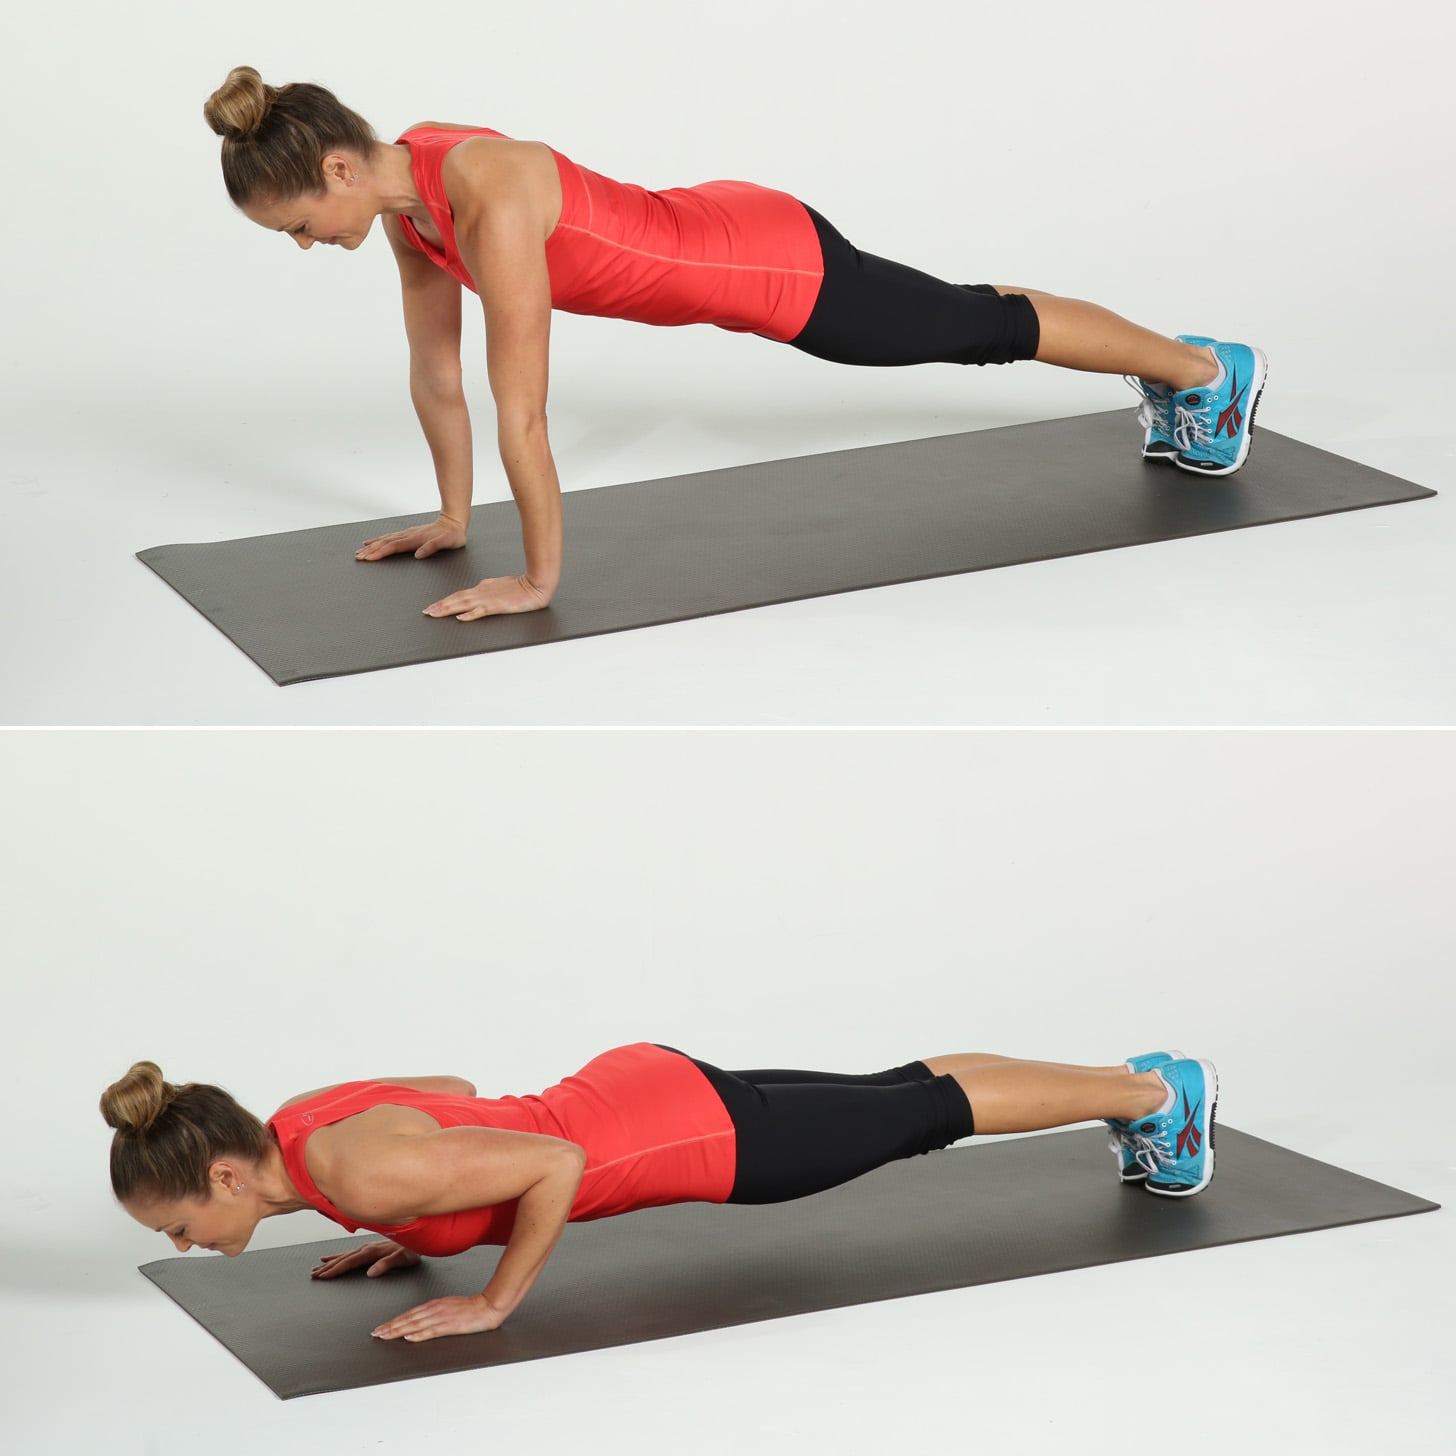 Be Warned! Your Arms Will Be So Sore After This 15-Minute At-Home Bodyweight Workout